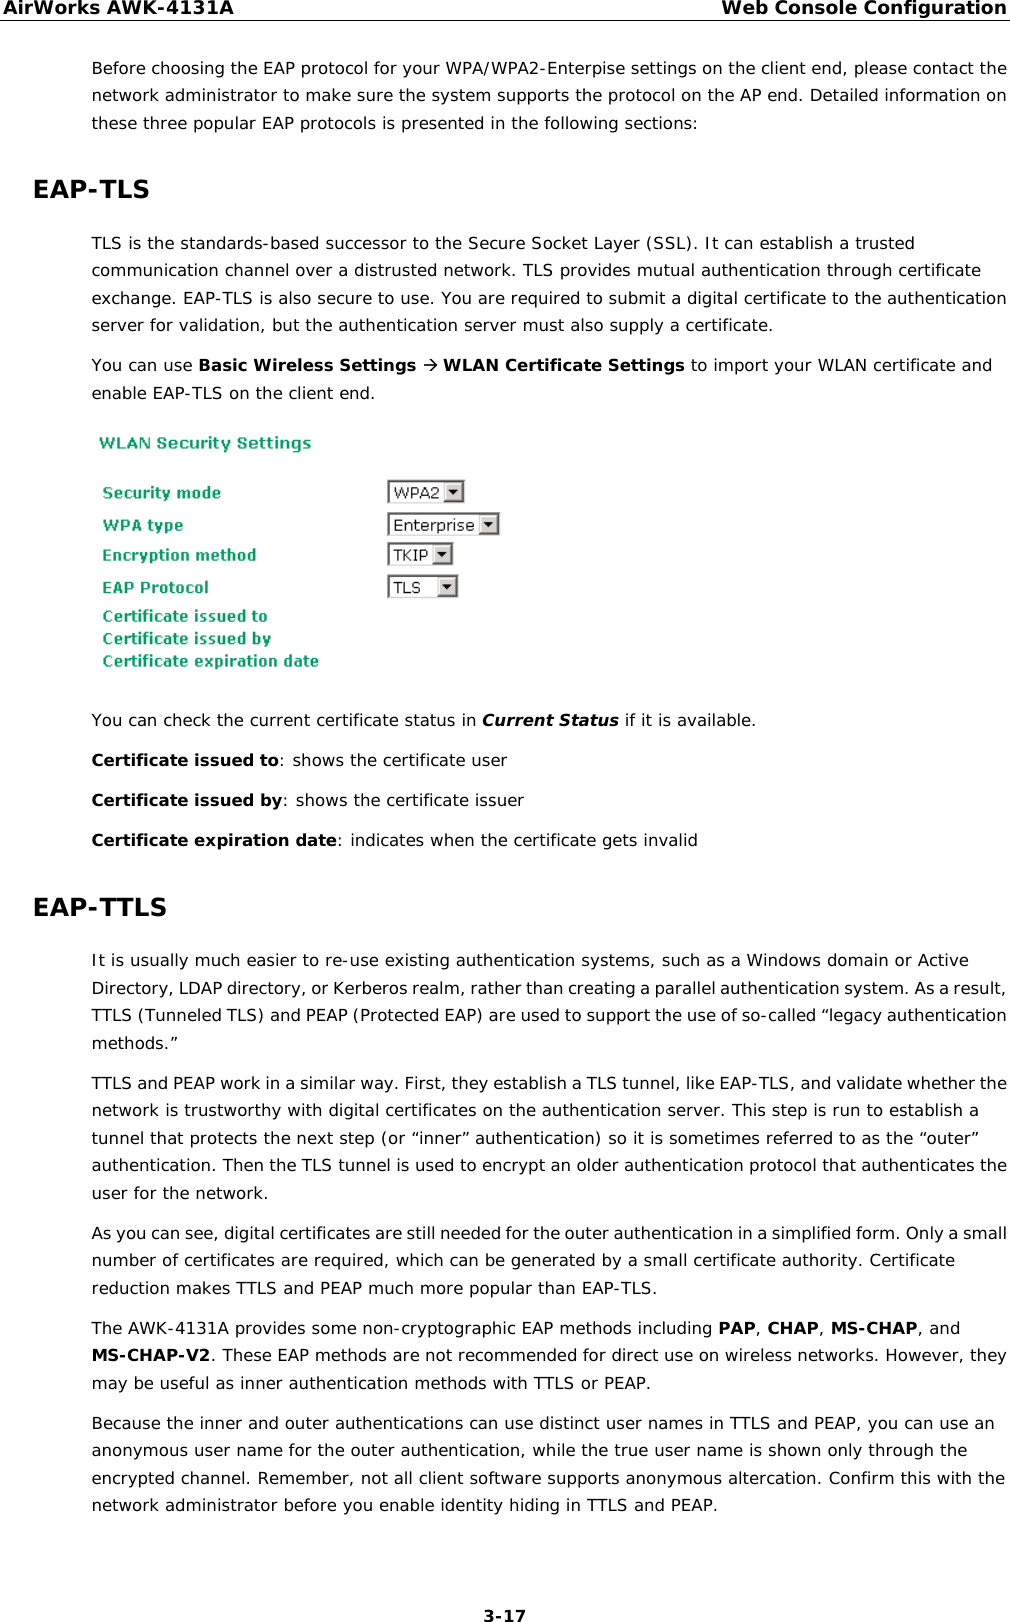 AirWorks AWK-4131A Web Console Configuration  3-17 Before choosing the EAP protocol for your WPA/WPA2-Enterpise settings on the client end, please contact the network administrator to make sure the system supports the protocol on the AP end. Detailed information on these three popular EAP protocols is presented in the following sections: EAP-TLS TLS is the standards-based successor to the Secure Socket Layer (SSL). It can establish a trusted communication channel over a distrusted network. TLS provides mutual authentication through certificate exchange. EAP-TLS is also secure to use. You are required to submit a digital certificate to the authentication server for validation, but the authentication server must also supply a certificate. You can use Basic Wireless Settings  WLAN Certificate Settings to import your WLAN certificate and enable EAP-TLS on the client end.  You can check the current certificate status in Current Status if it is available. Certificate issued to: shows the certificate user Certificate issued by: shows the certificate issuer Certificate expiration date: indicates when the certificate gets invalid EAP-TTLS It is usually much easier to re-use existing authentication systems, such as a Windows domain or Active Directory, LDAP directory, or Kerberos realm, rather than creating a parallel authentication system. As a result, TTLS (Tunneled TLS) and PEAP (Protected EAP) are used to support the use of so-called “legacy authentication methods.”  TTLS and PEAP work in a similar way. First, they establish a TLS tunnel, like EAP-TLS, and validate whether the network is trustworthy with digital certificates on the authentication server. This step is run to establish a tunnel that protects the next step (or “inner” authentication) so it is sometimes referred to as the “outer” authentication. Then the TLS tunnel is used to encrypt an older authentication protocol that authenticates the user for the network. As you can see, digital certificates are still needed for the outer authentication in a simplified form. Only a small number of certificates are required, which can be generated by a small certificate authority. Certificate reduction makes TTLS and PEAP much more popular than EAP-TLS. The AWK-4131A provides some non-cryptographic EAP methods including PAP, CHAP, MS-CHAP, and MS-CHAP-V2. These EAP methods are not recommended for direct use on wireless networks. However, they may be useful as inner authentication methods with TTLS or PEAP.  Because the inner and outer authentications can use distinct user names in TTLS and PEAP, you can use an anonymous user name for the outer authentication, while the true user name is shown only through the encrypted channel. Remember, not all client software supports anonymous altercation. Confirm this with the network administrator before you enable identity hiding in TTLS and PEAP. 